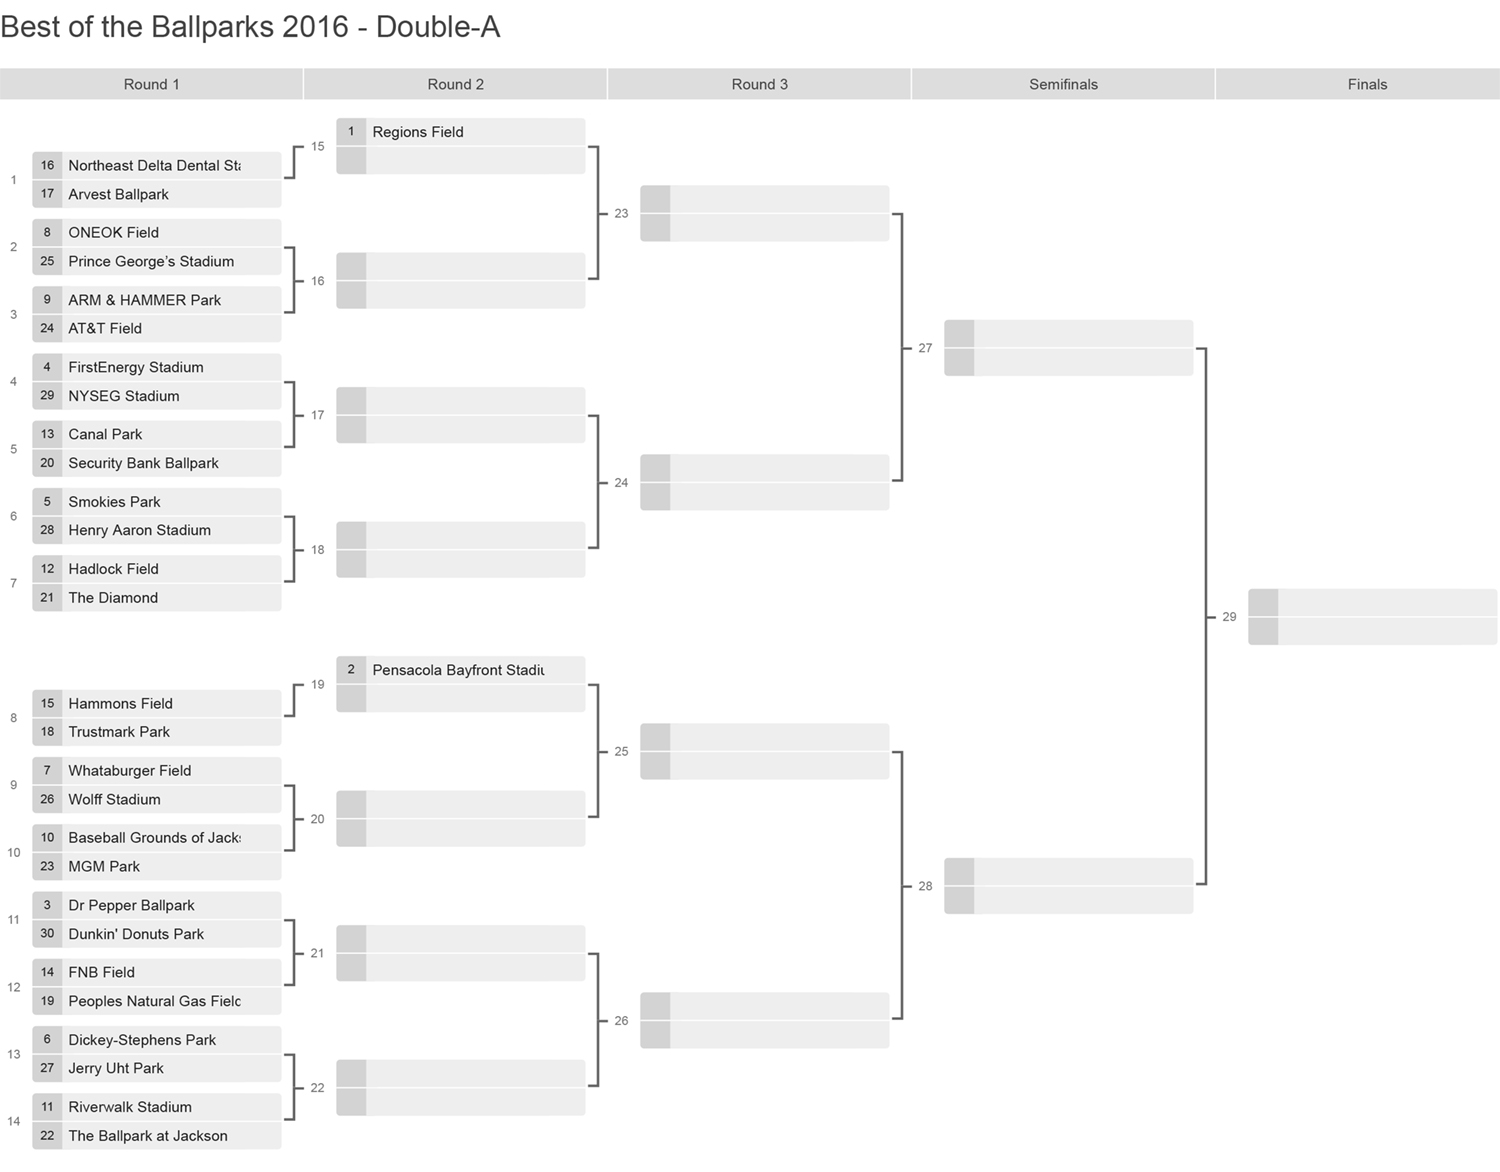 Double-A brackets, Best of the Ballparks 2016